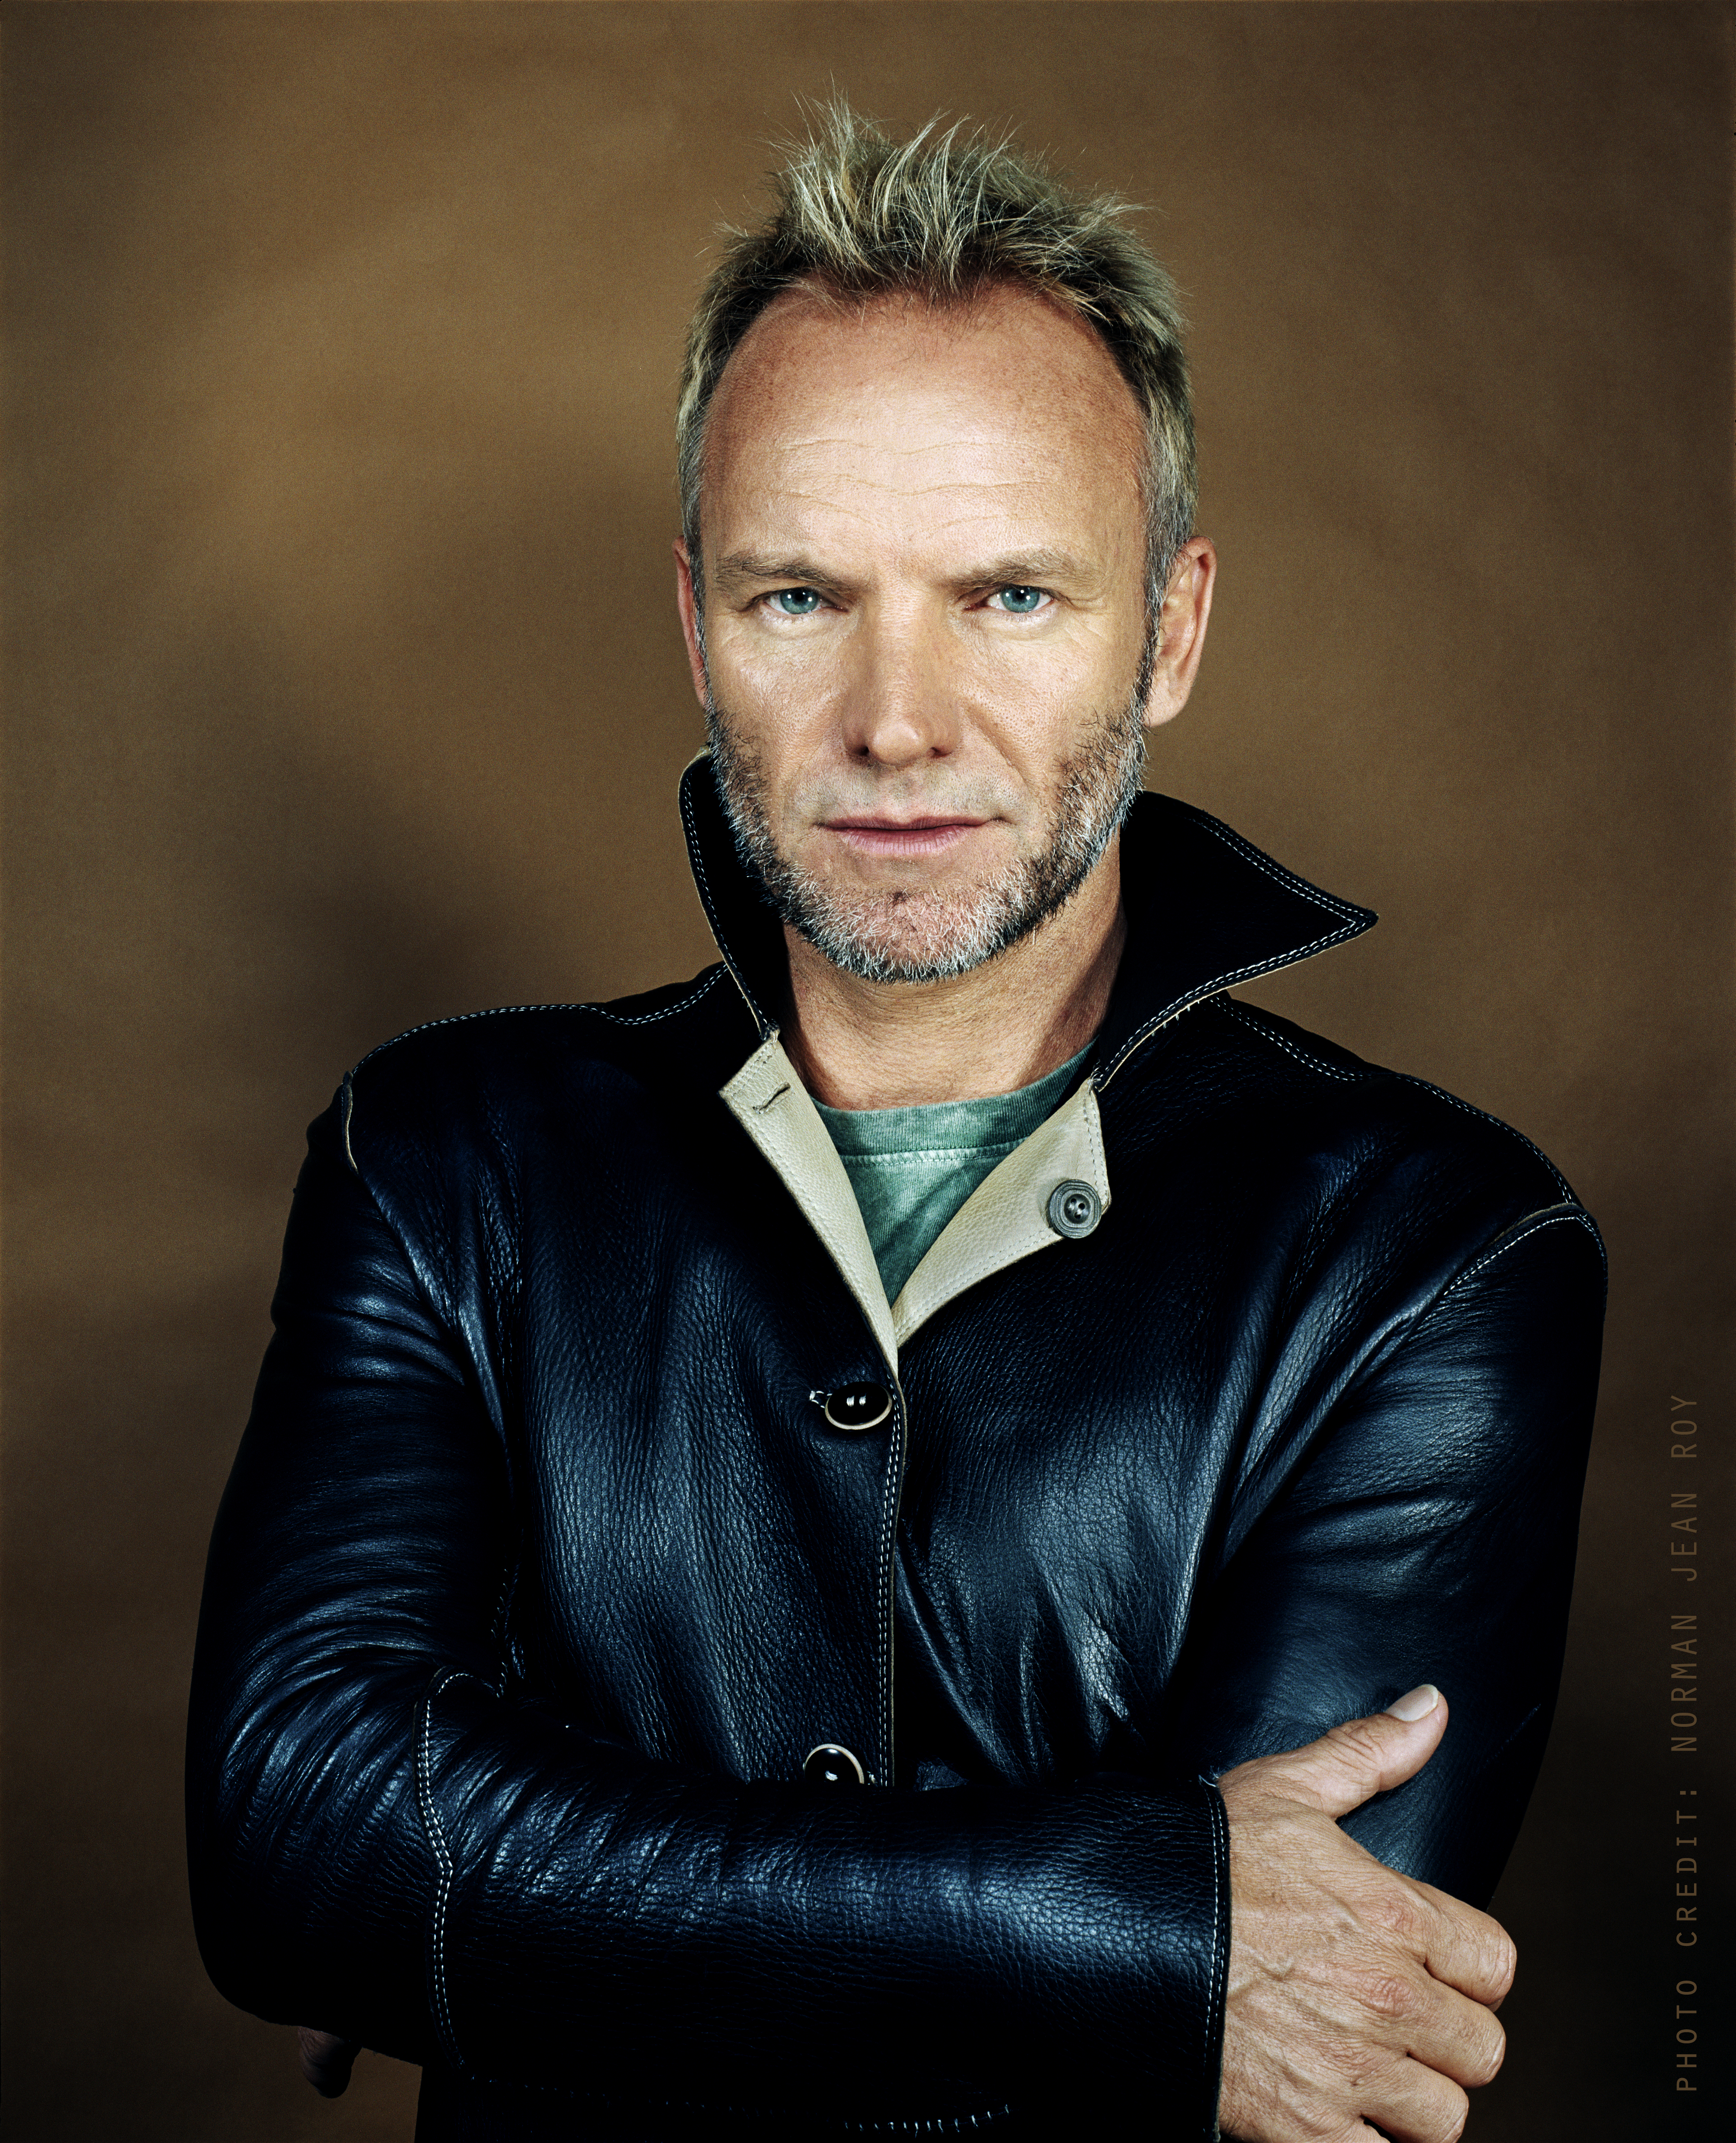 Sting.com - Official Site and Official Fan Club for Sting news.